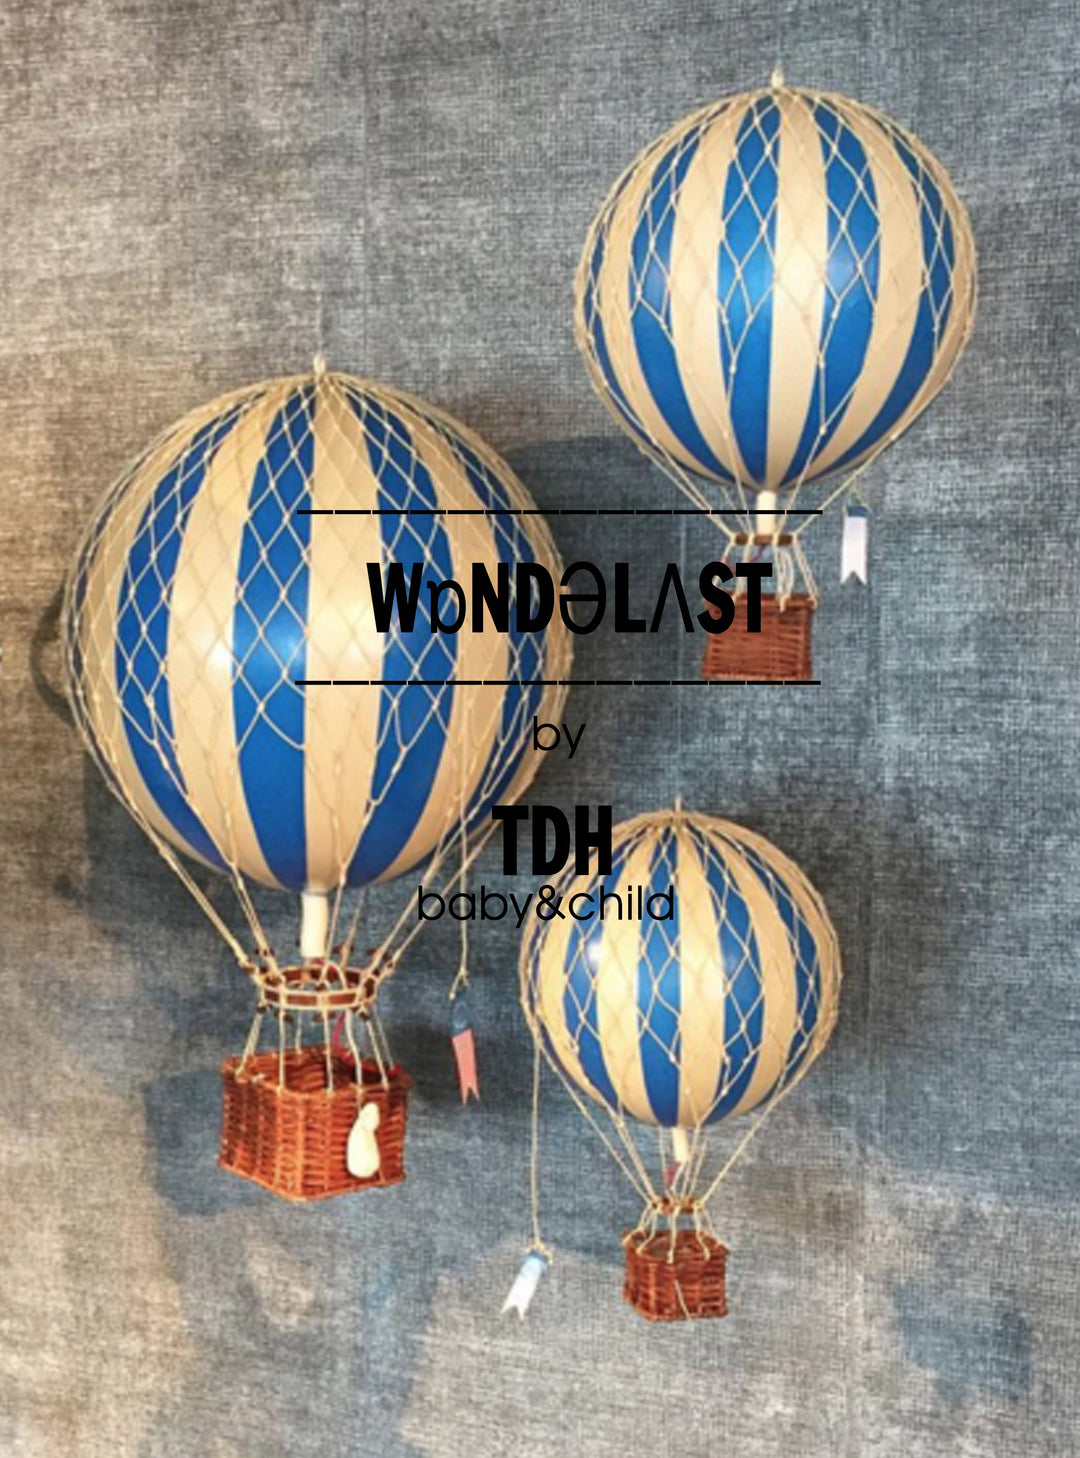 Blue Hot Air Balloon, Vintage Hot Air Balloon Decoration, Authentic Model Hot air balloon, Extraordinary Voyages,